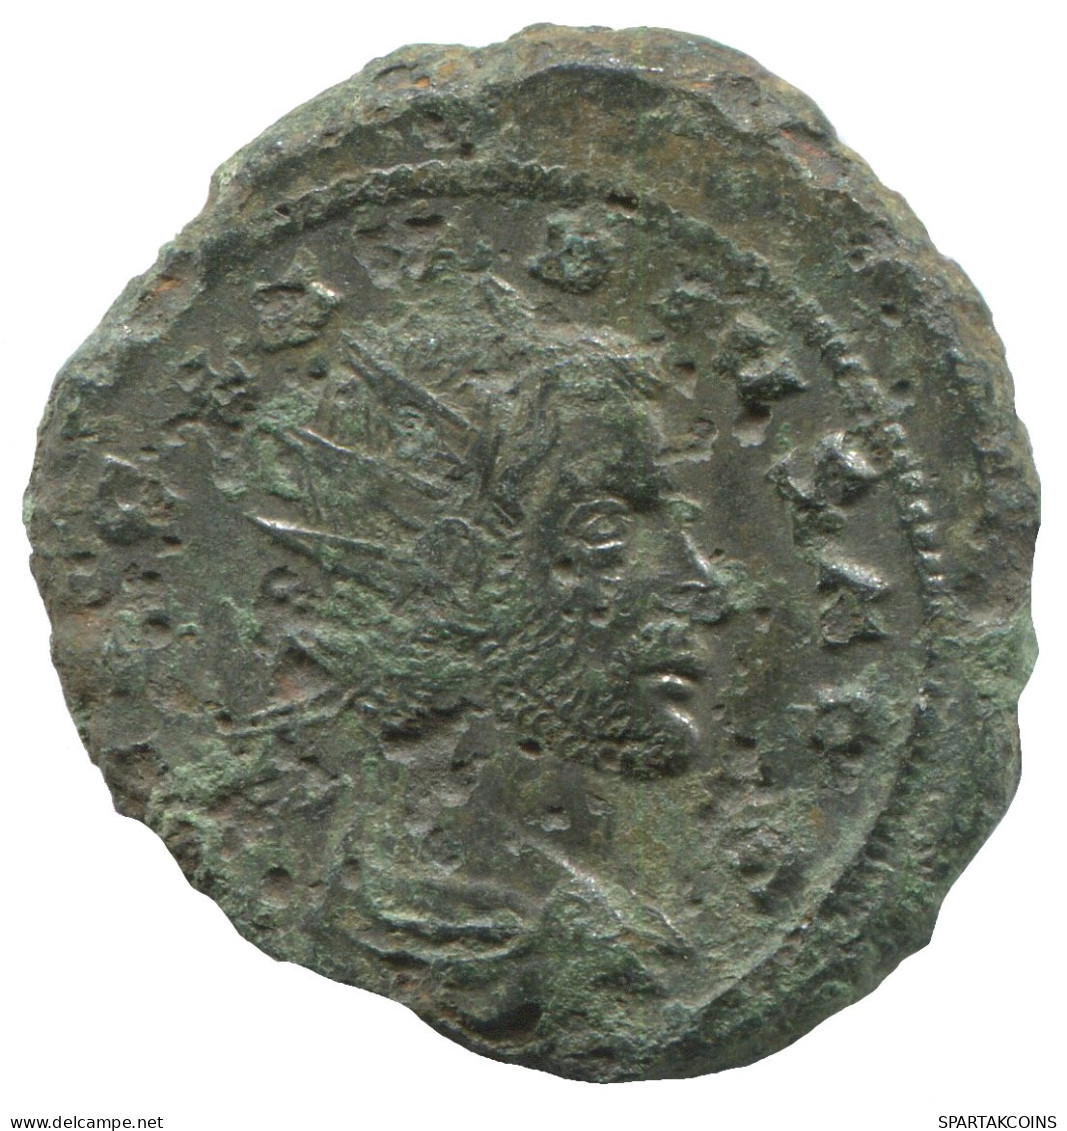 CLAUDIUS II GOTHICUS ROMAN EMPIRE Pièce 3g/23mm #SAV1051.9.F.A - The Military Crisis (235 AD Tot 284 AD)